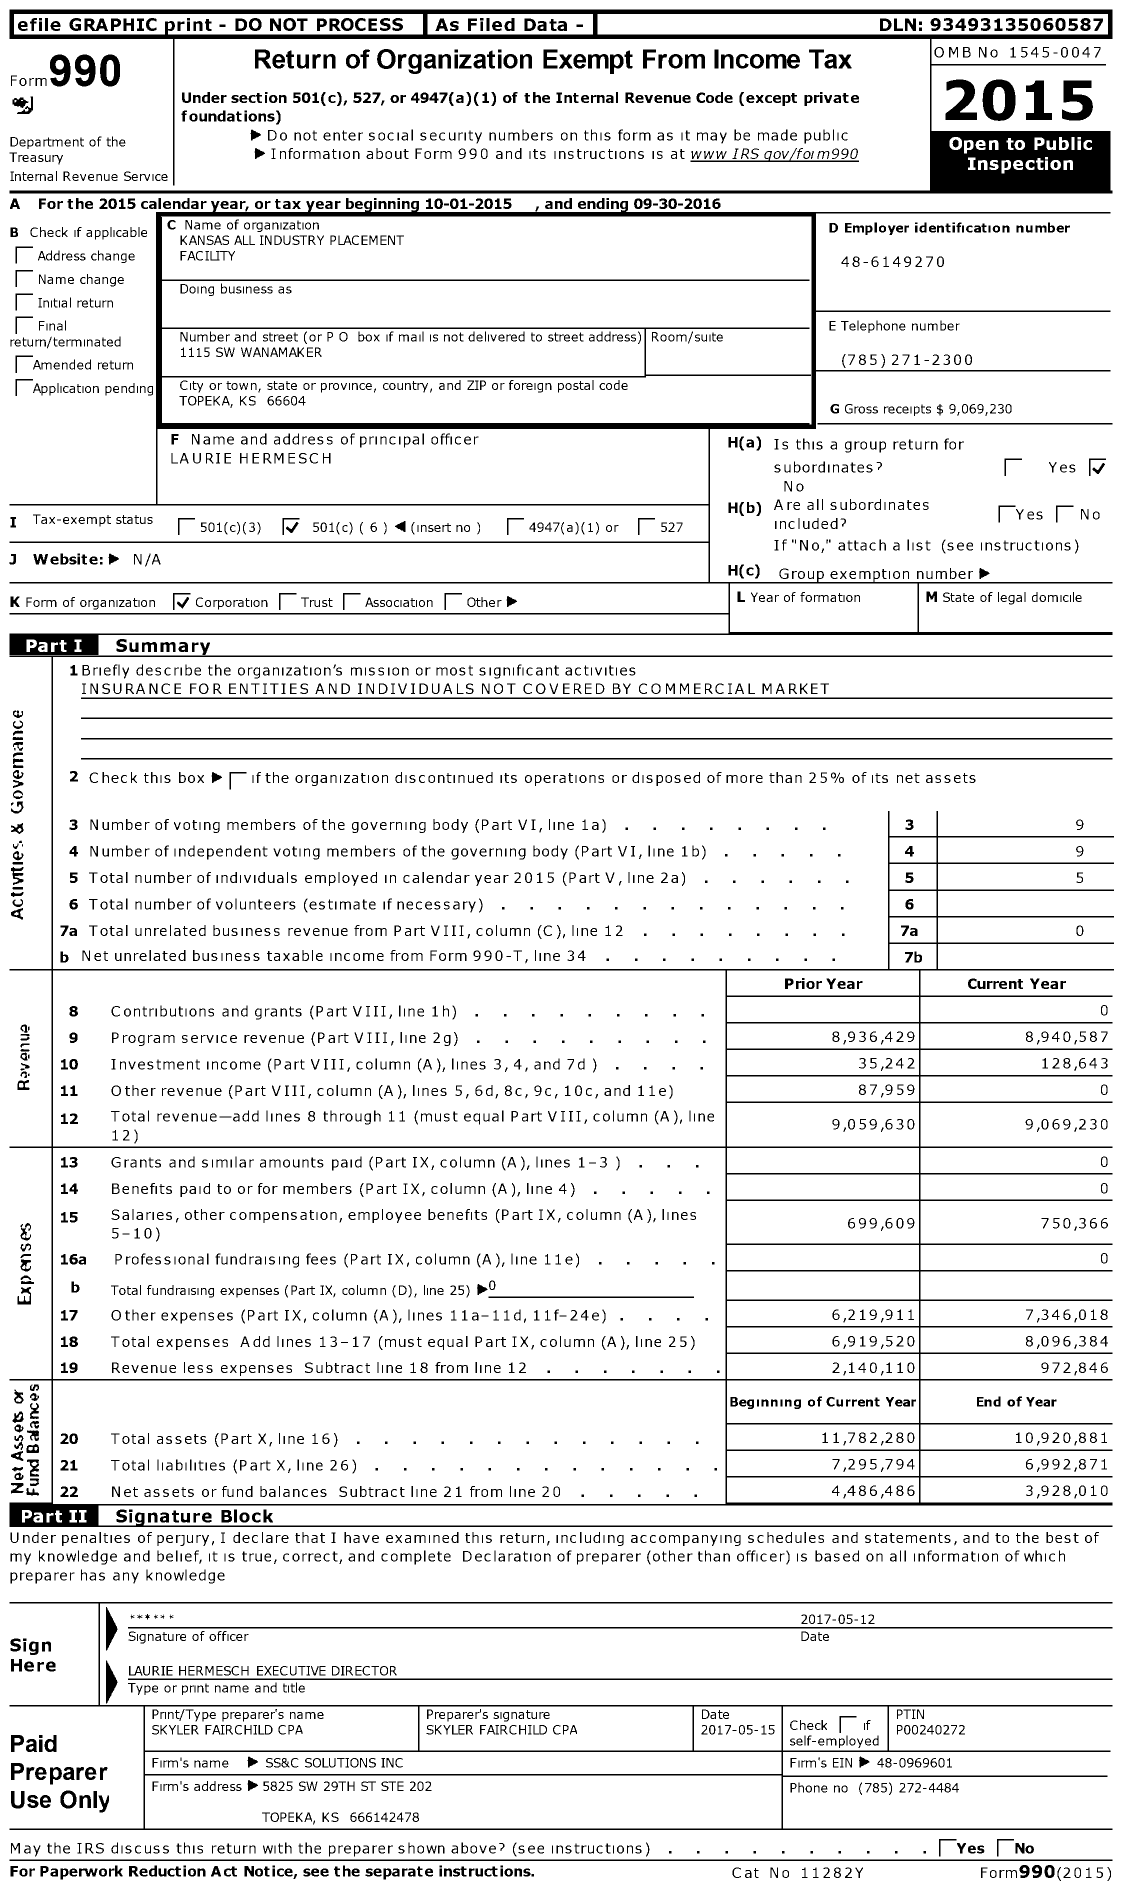 Image of first page of 2015 Form 990O for Kansas All Industry Placement Facility